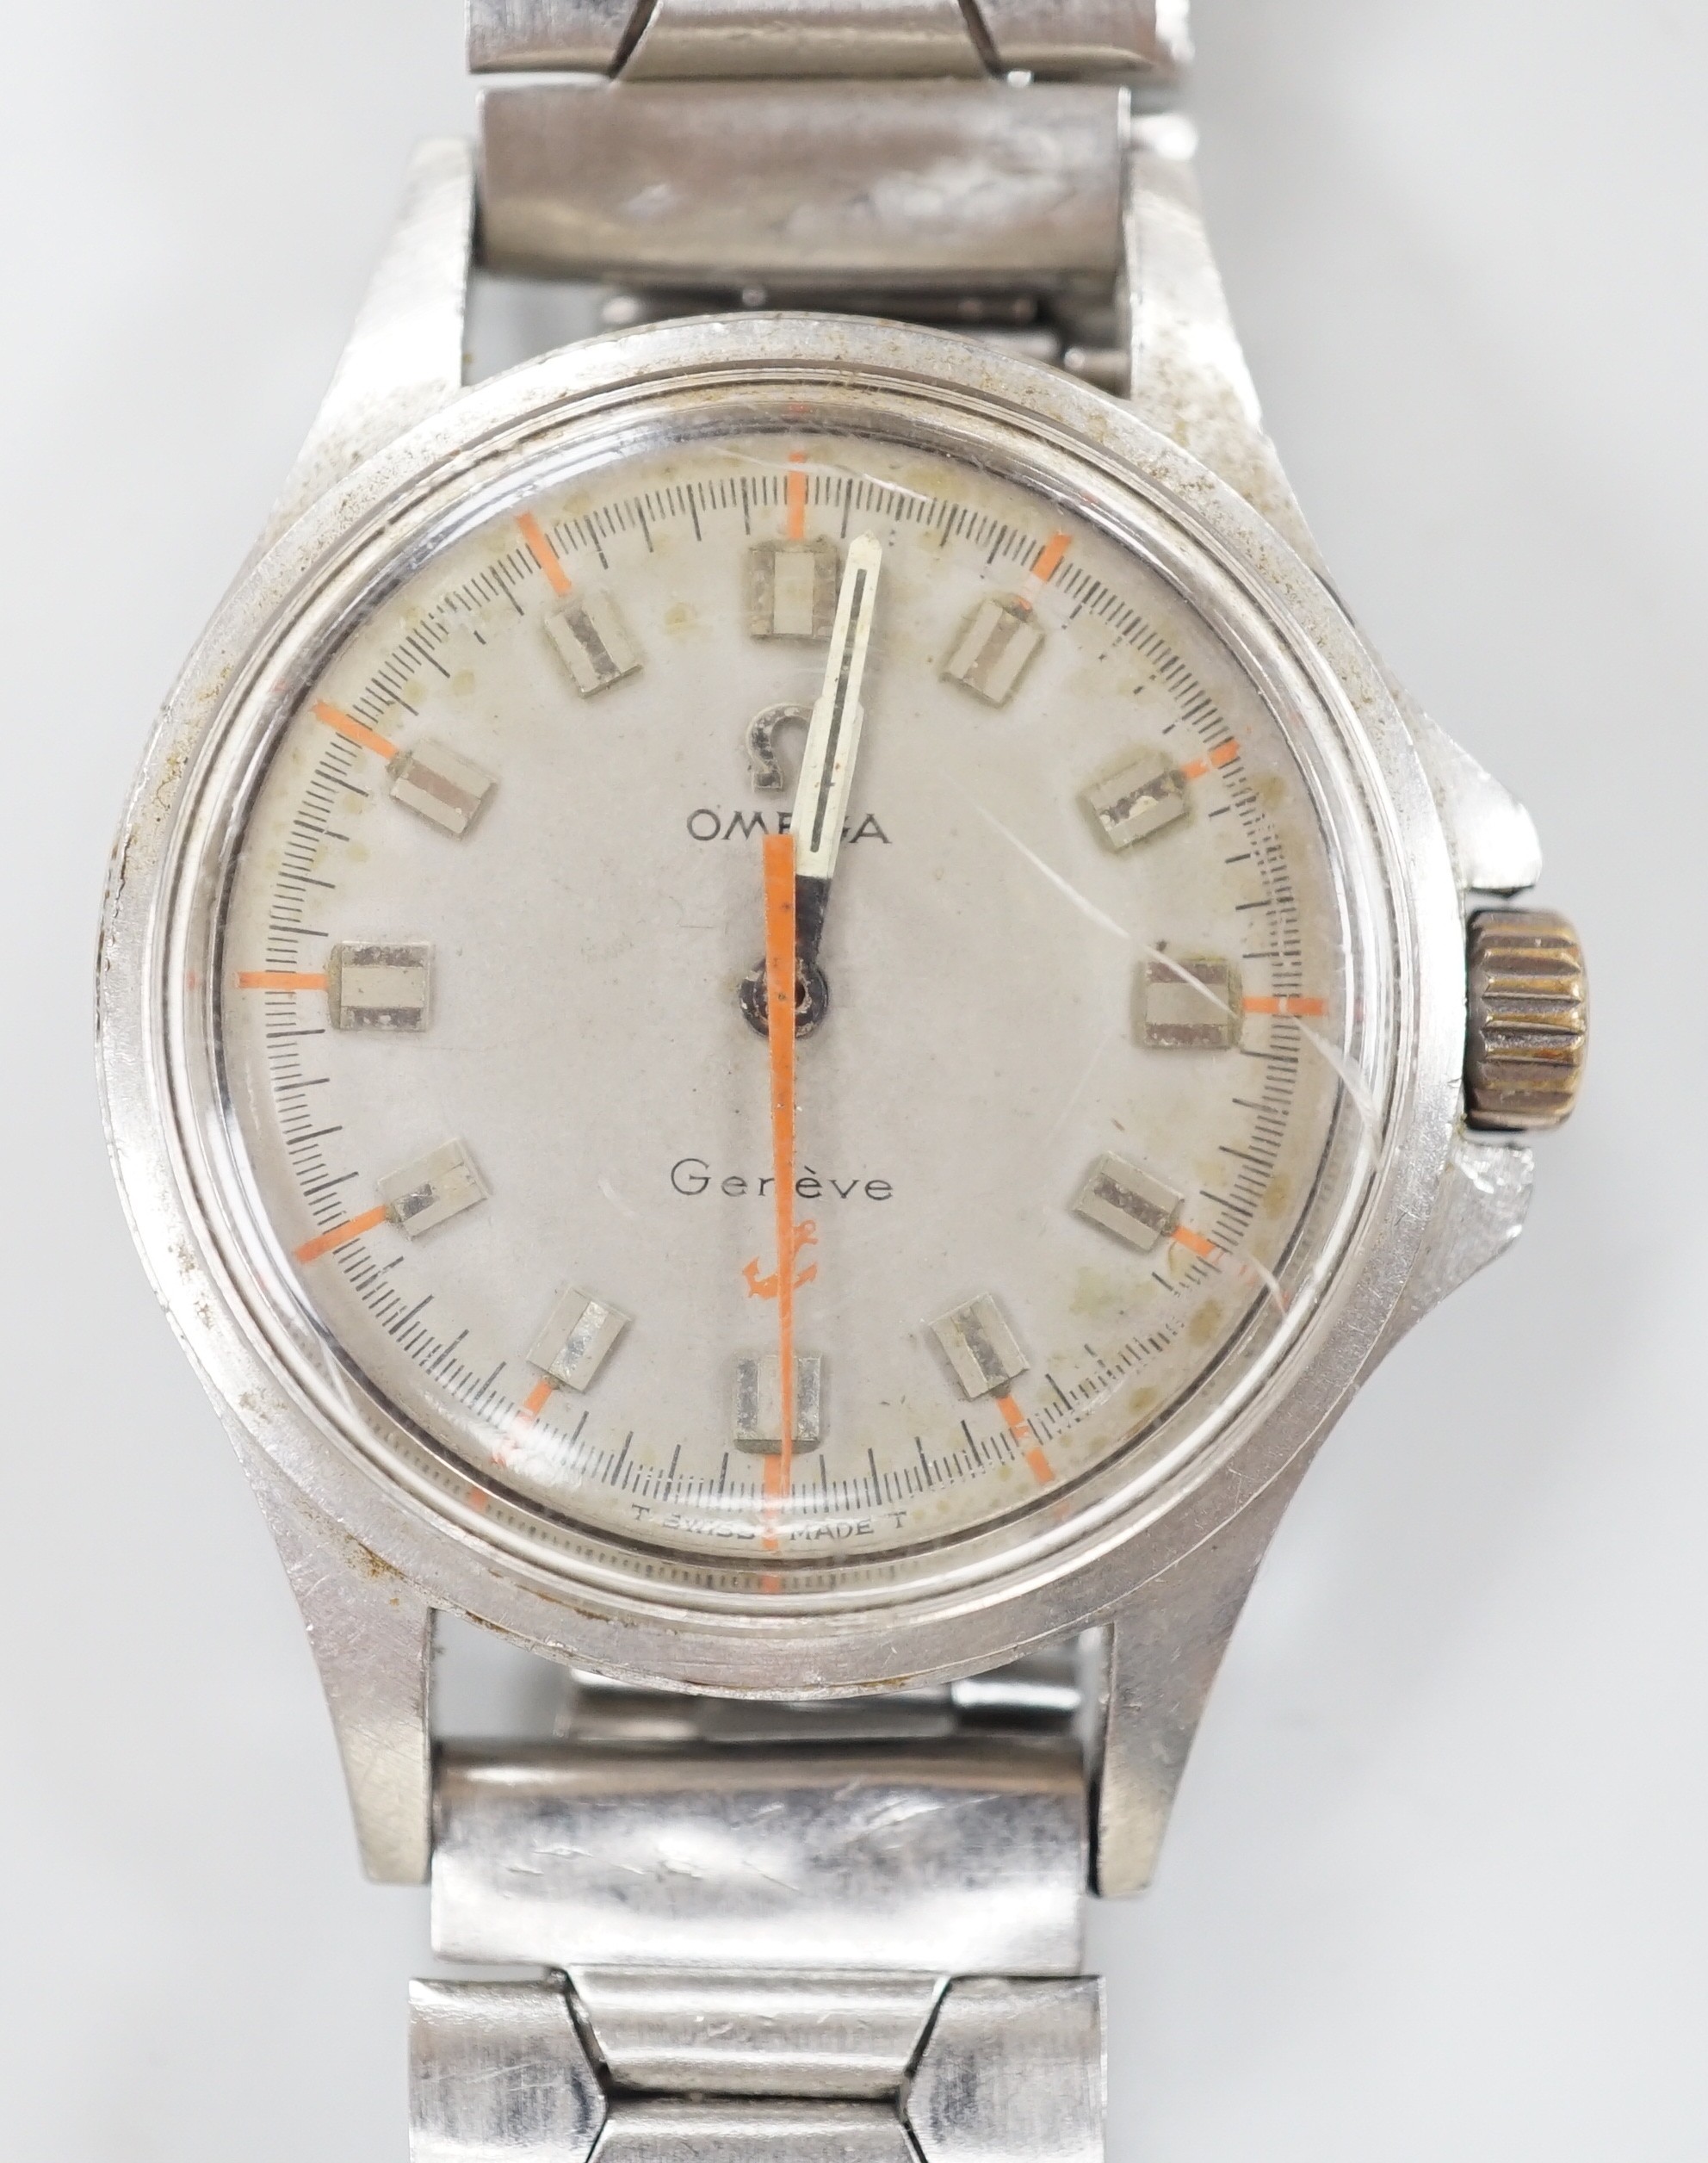 A gentleman's late 1960's stainless steel Omega manual wind wrist watch, movement c.601, case diameter 35mm, with orange sweep seconds, on associated steel bracelet.